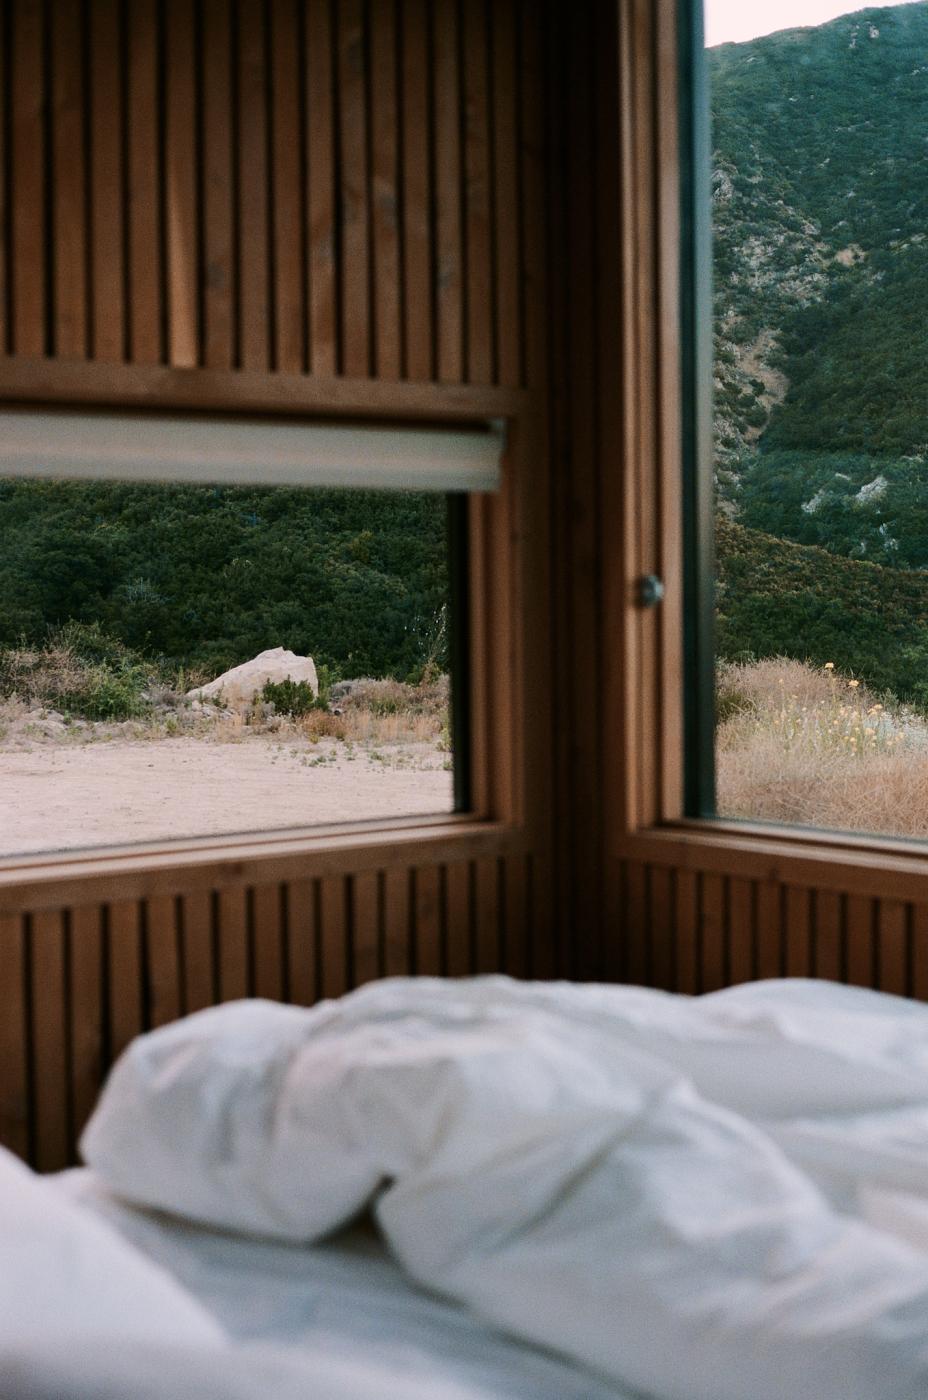 New work for Find Sanctuary-- a micro-cabin travel experience tucked away in the San Bernardino Mountains